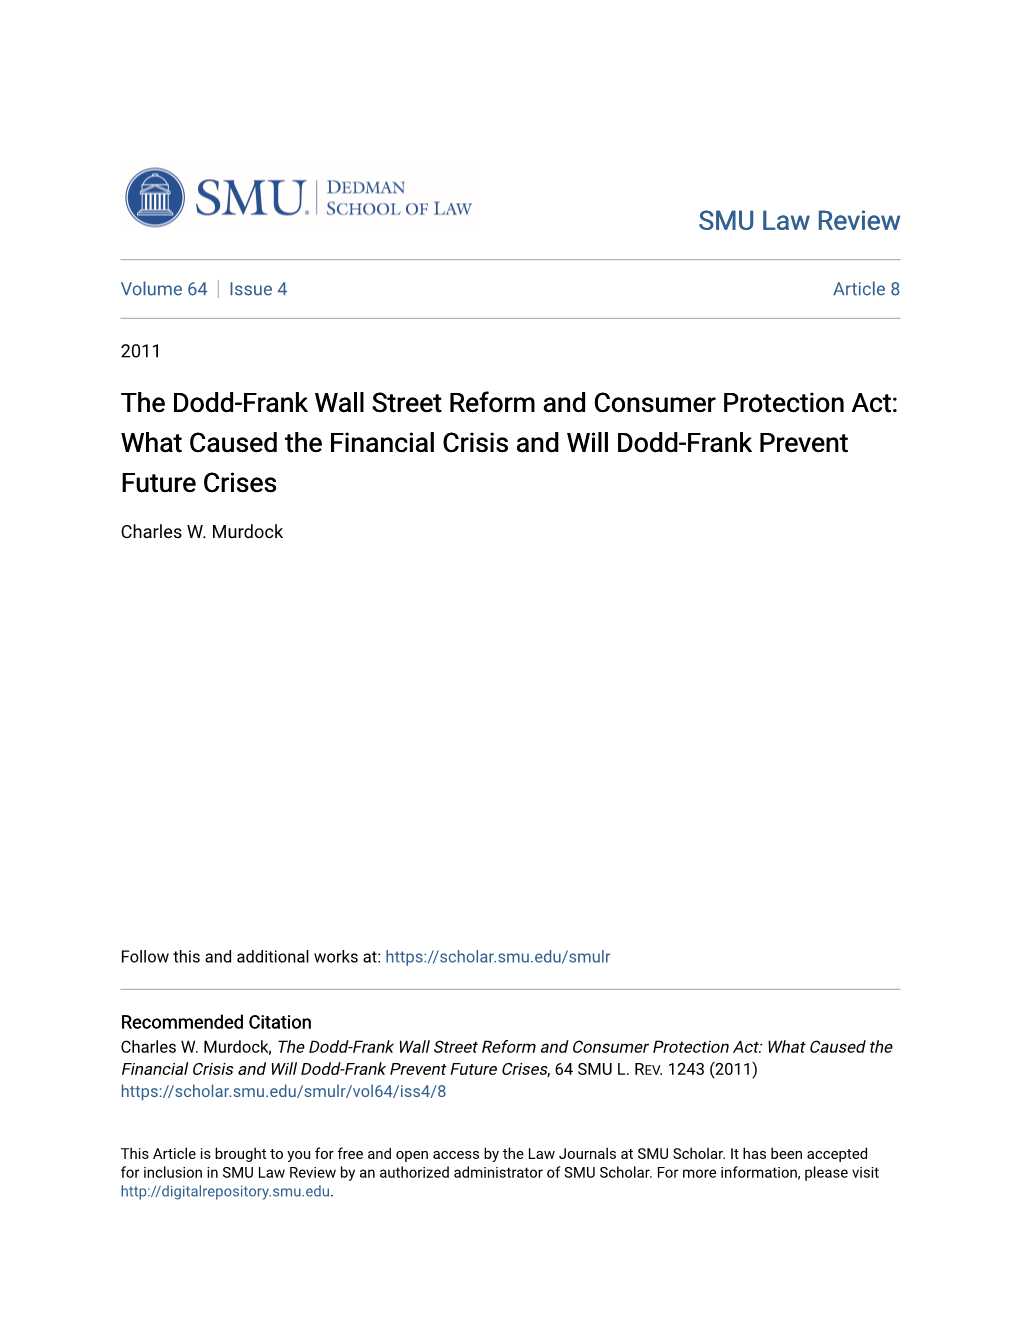 The Dodd-Frank Wall Street Reform and Consumer Protection Act: What Caused the Financial Crisis and Will Dodd-Frank Prevent Future Crises